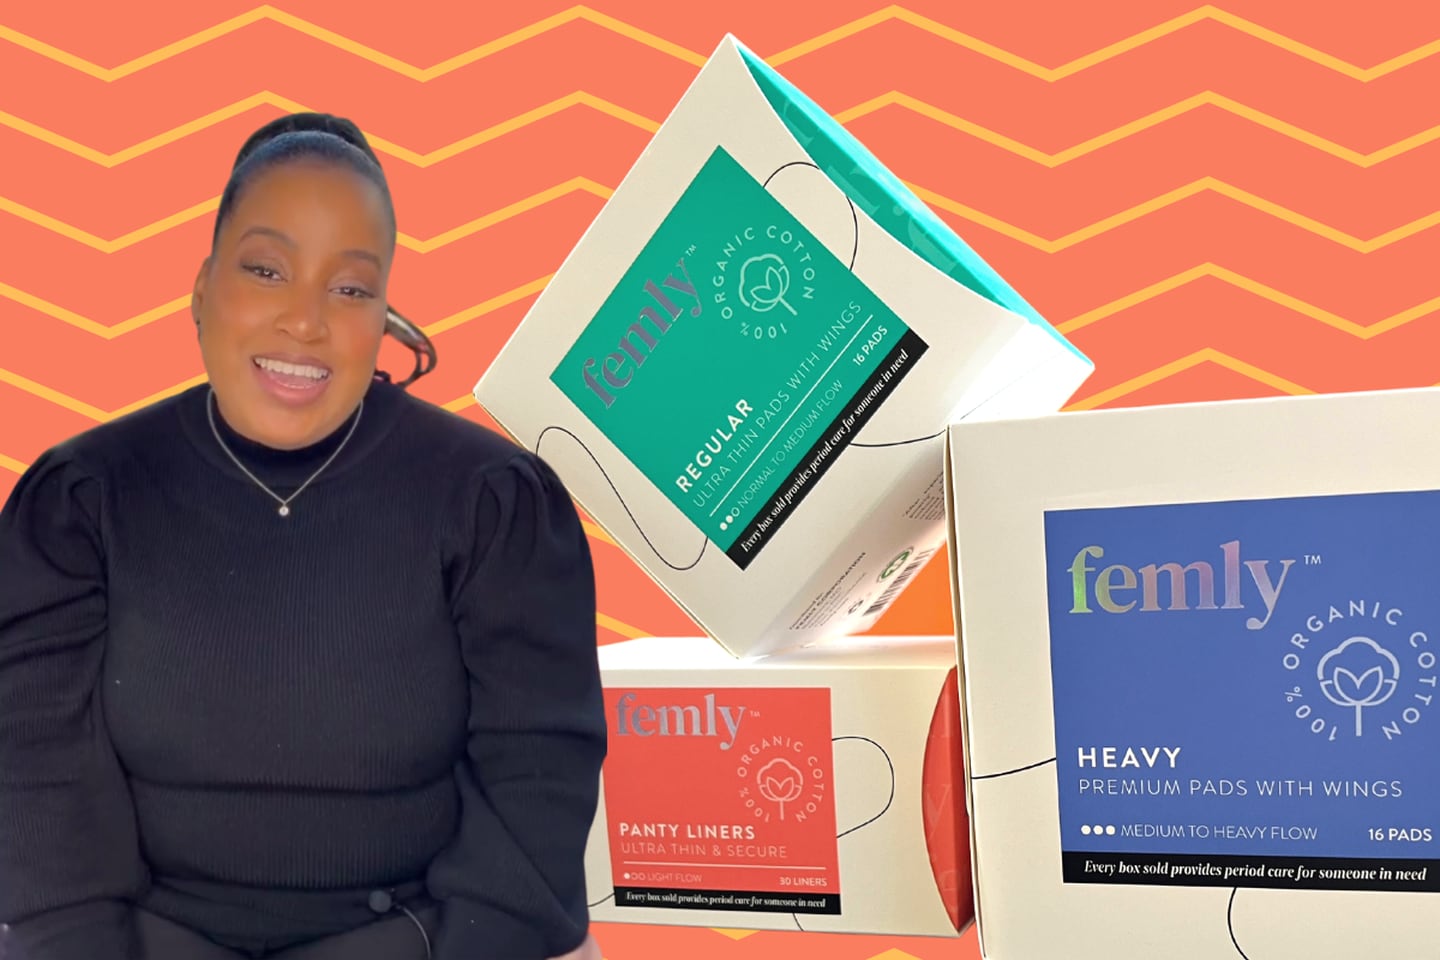 Arion Long discusses her story and how she started the company Femly